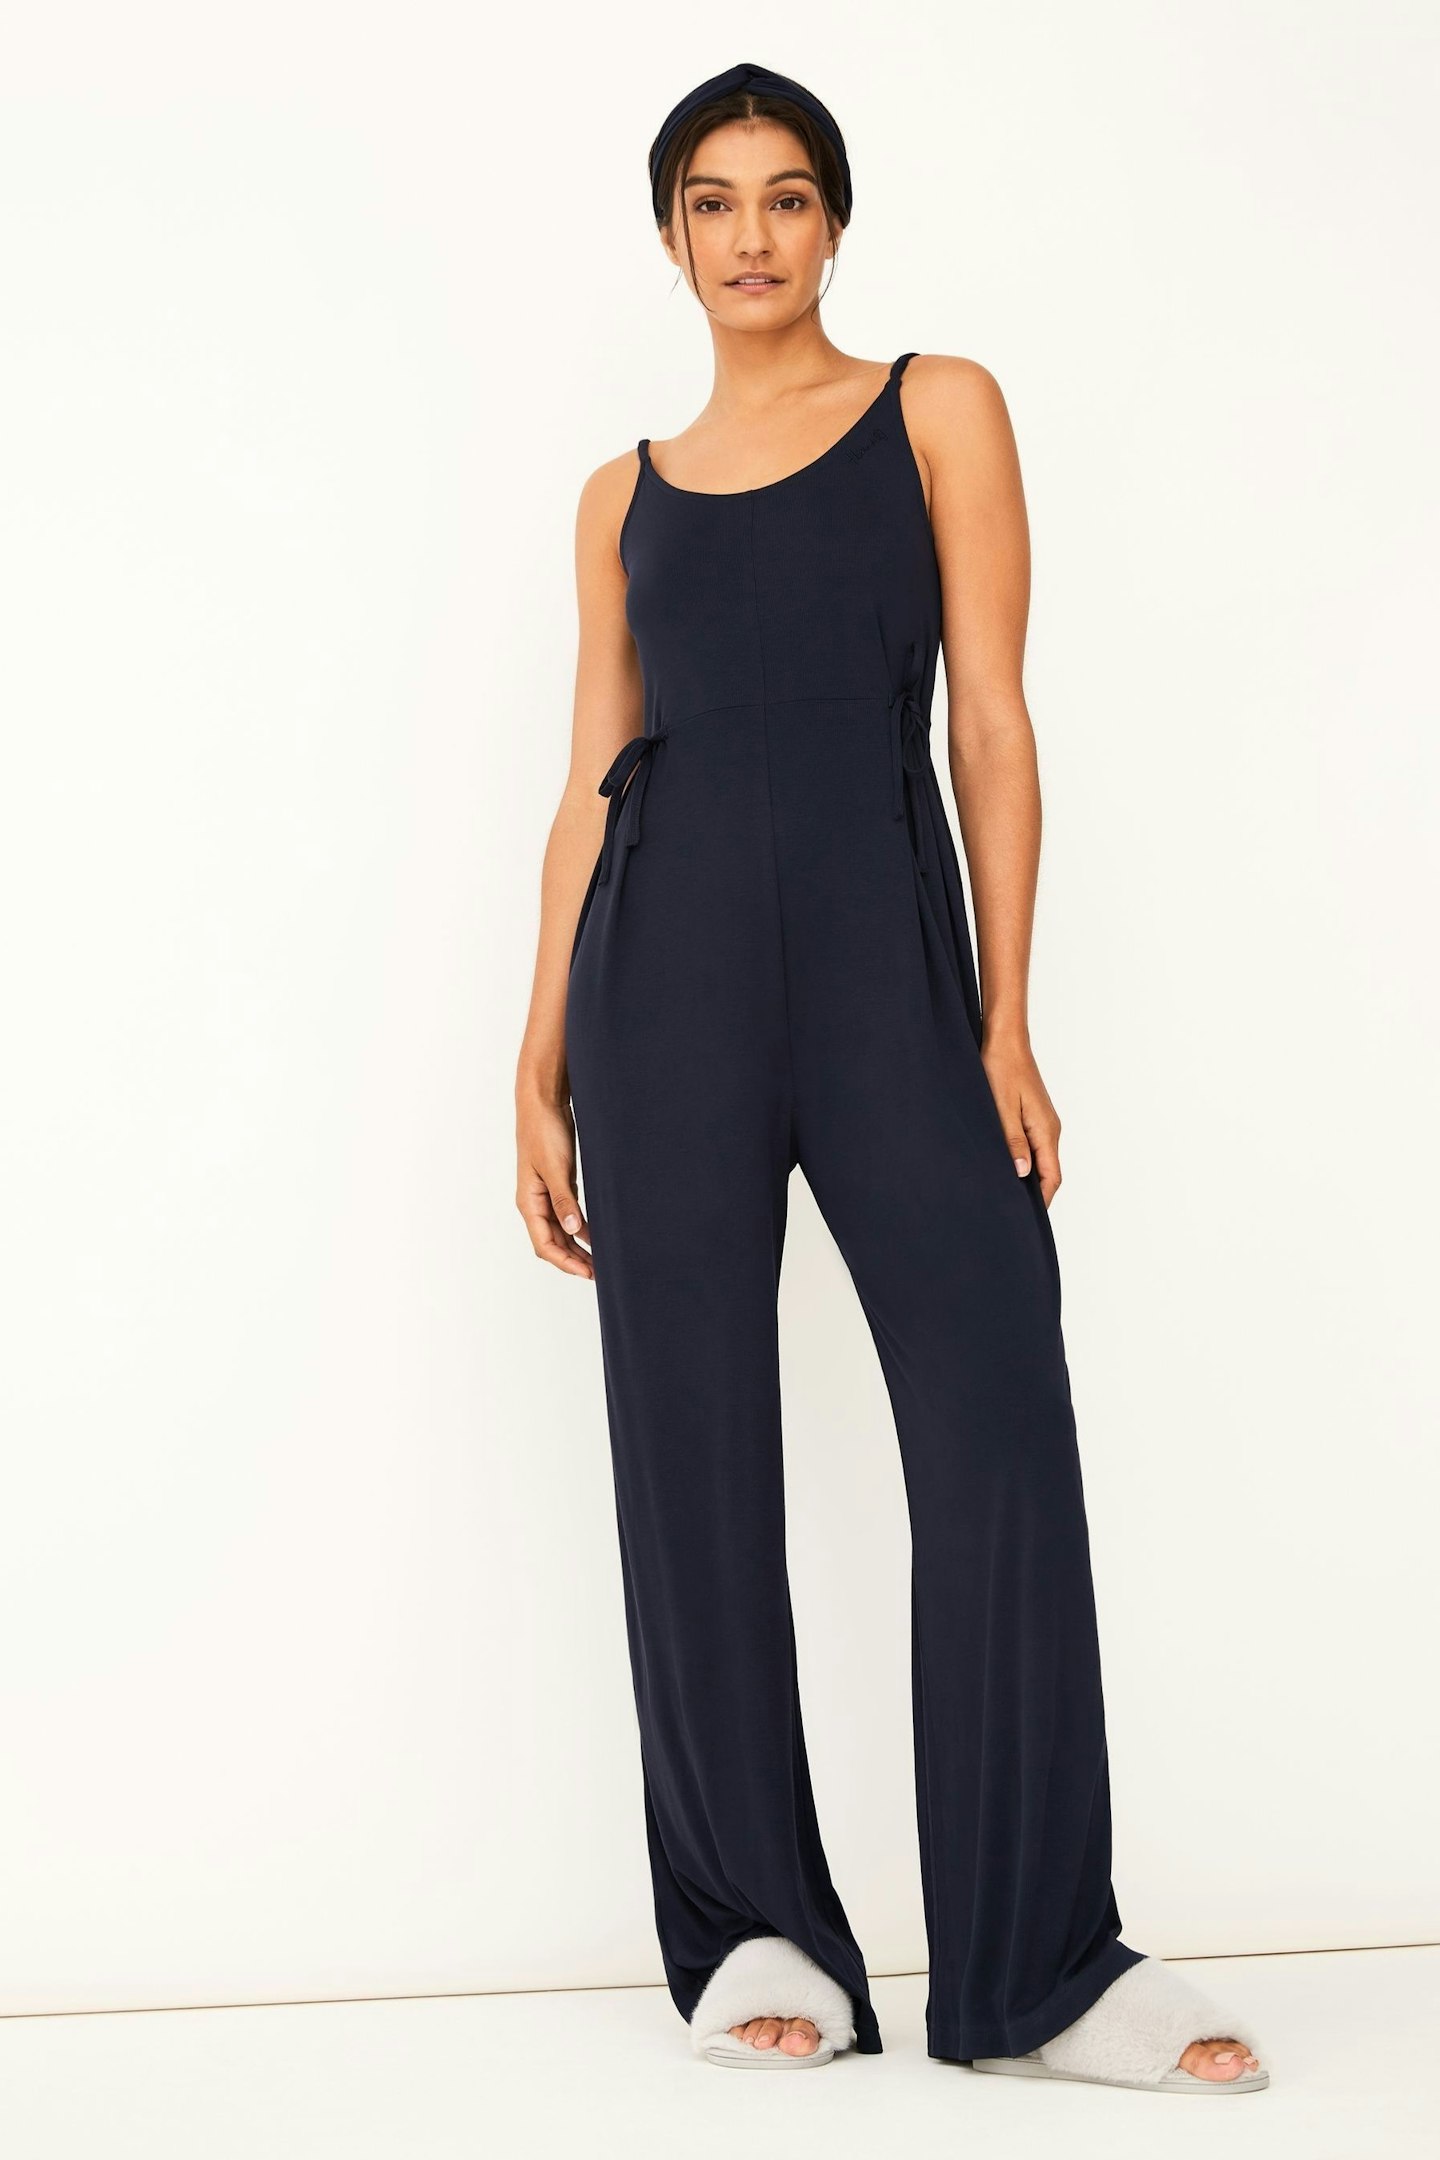 Navy Ribbed Jumpsuit, £22